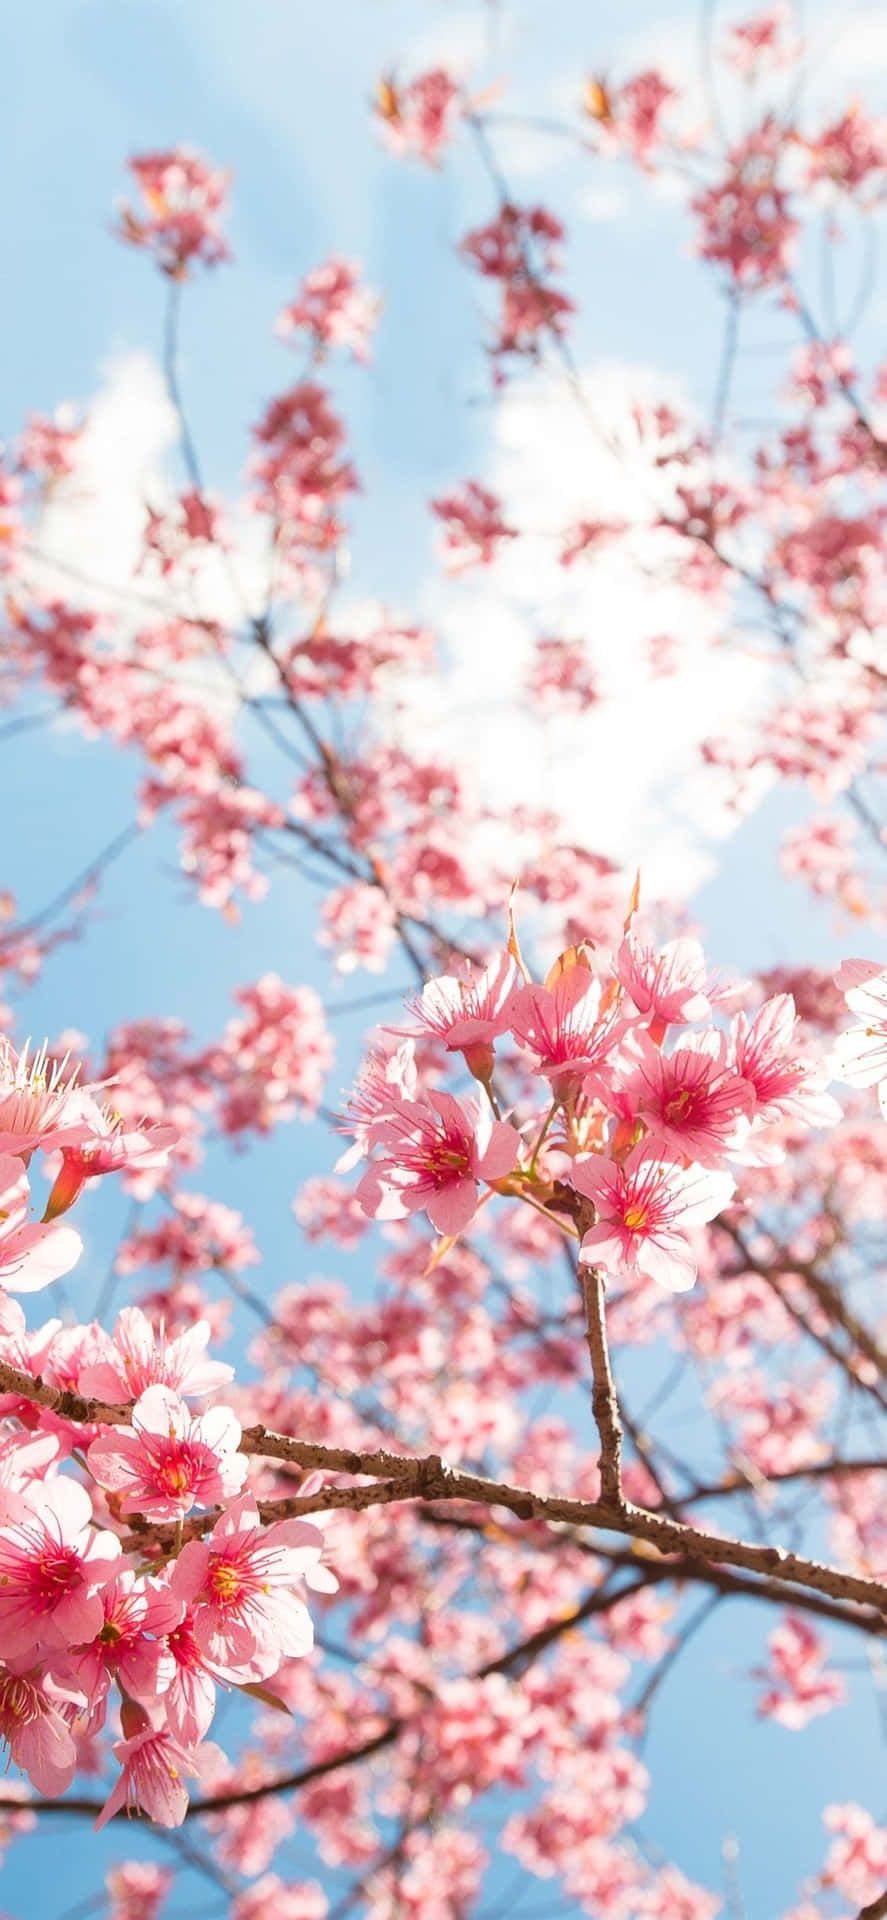 A branch of cherry blossoms with a blue sky in the background - Cherry blossom